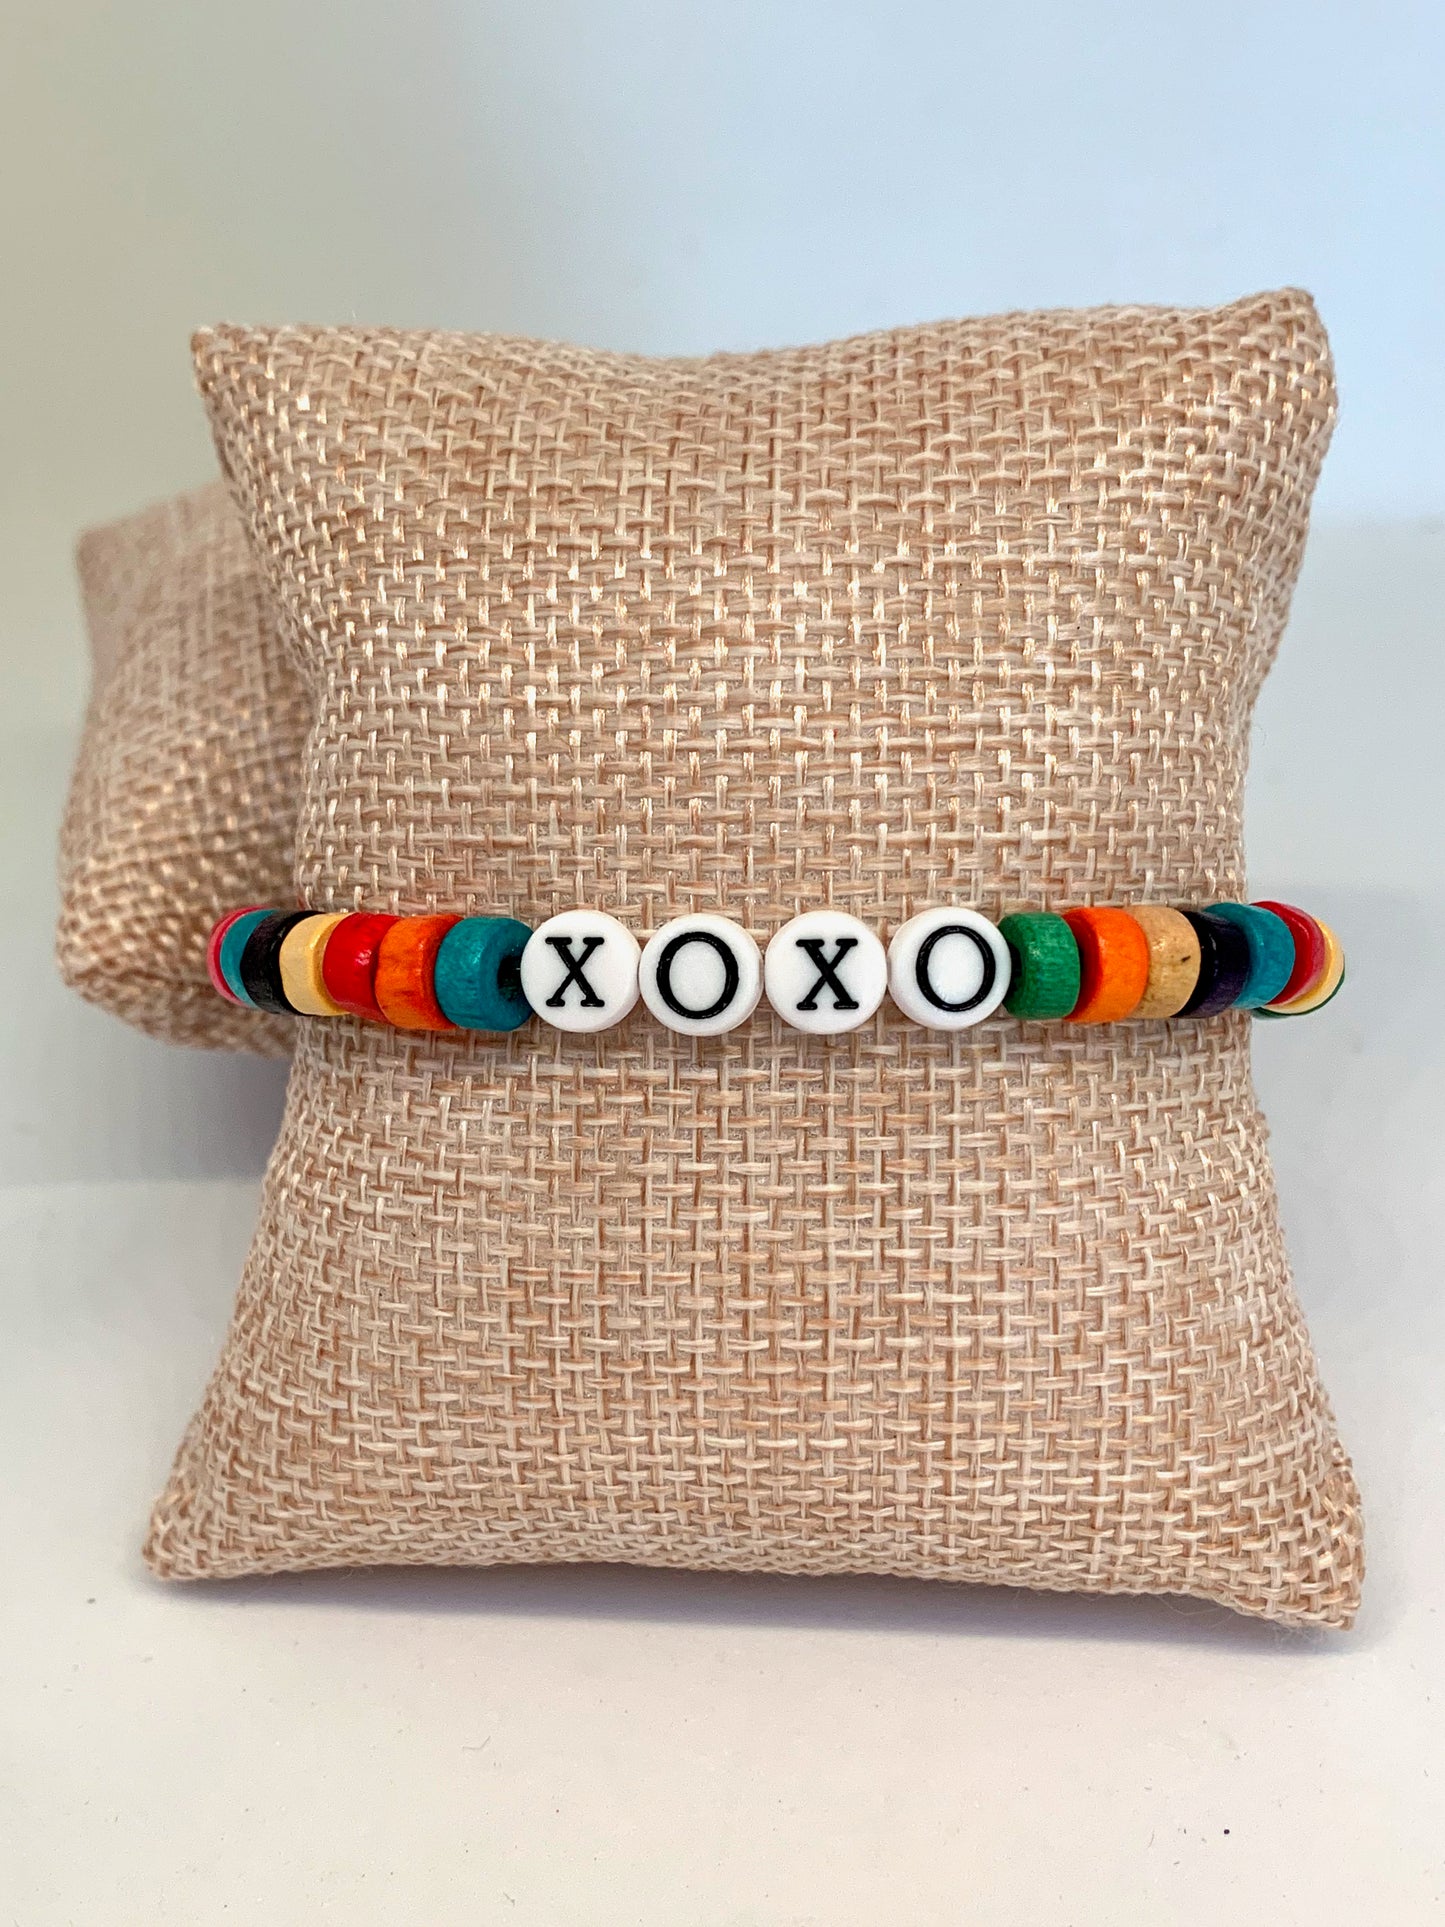 Multicolored Wooden Beaded Bracelet with XOXO